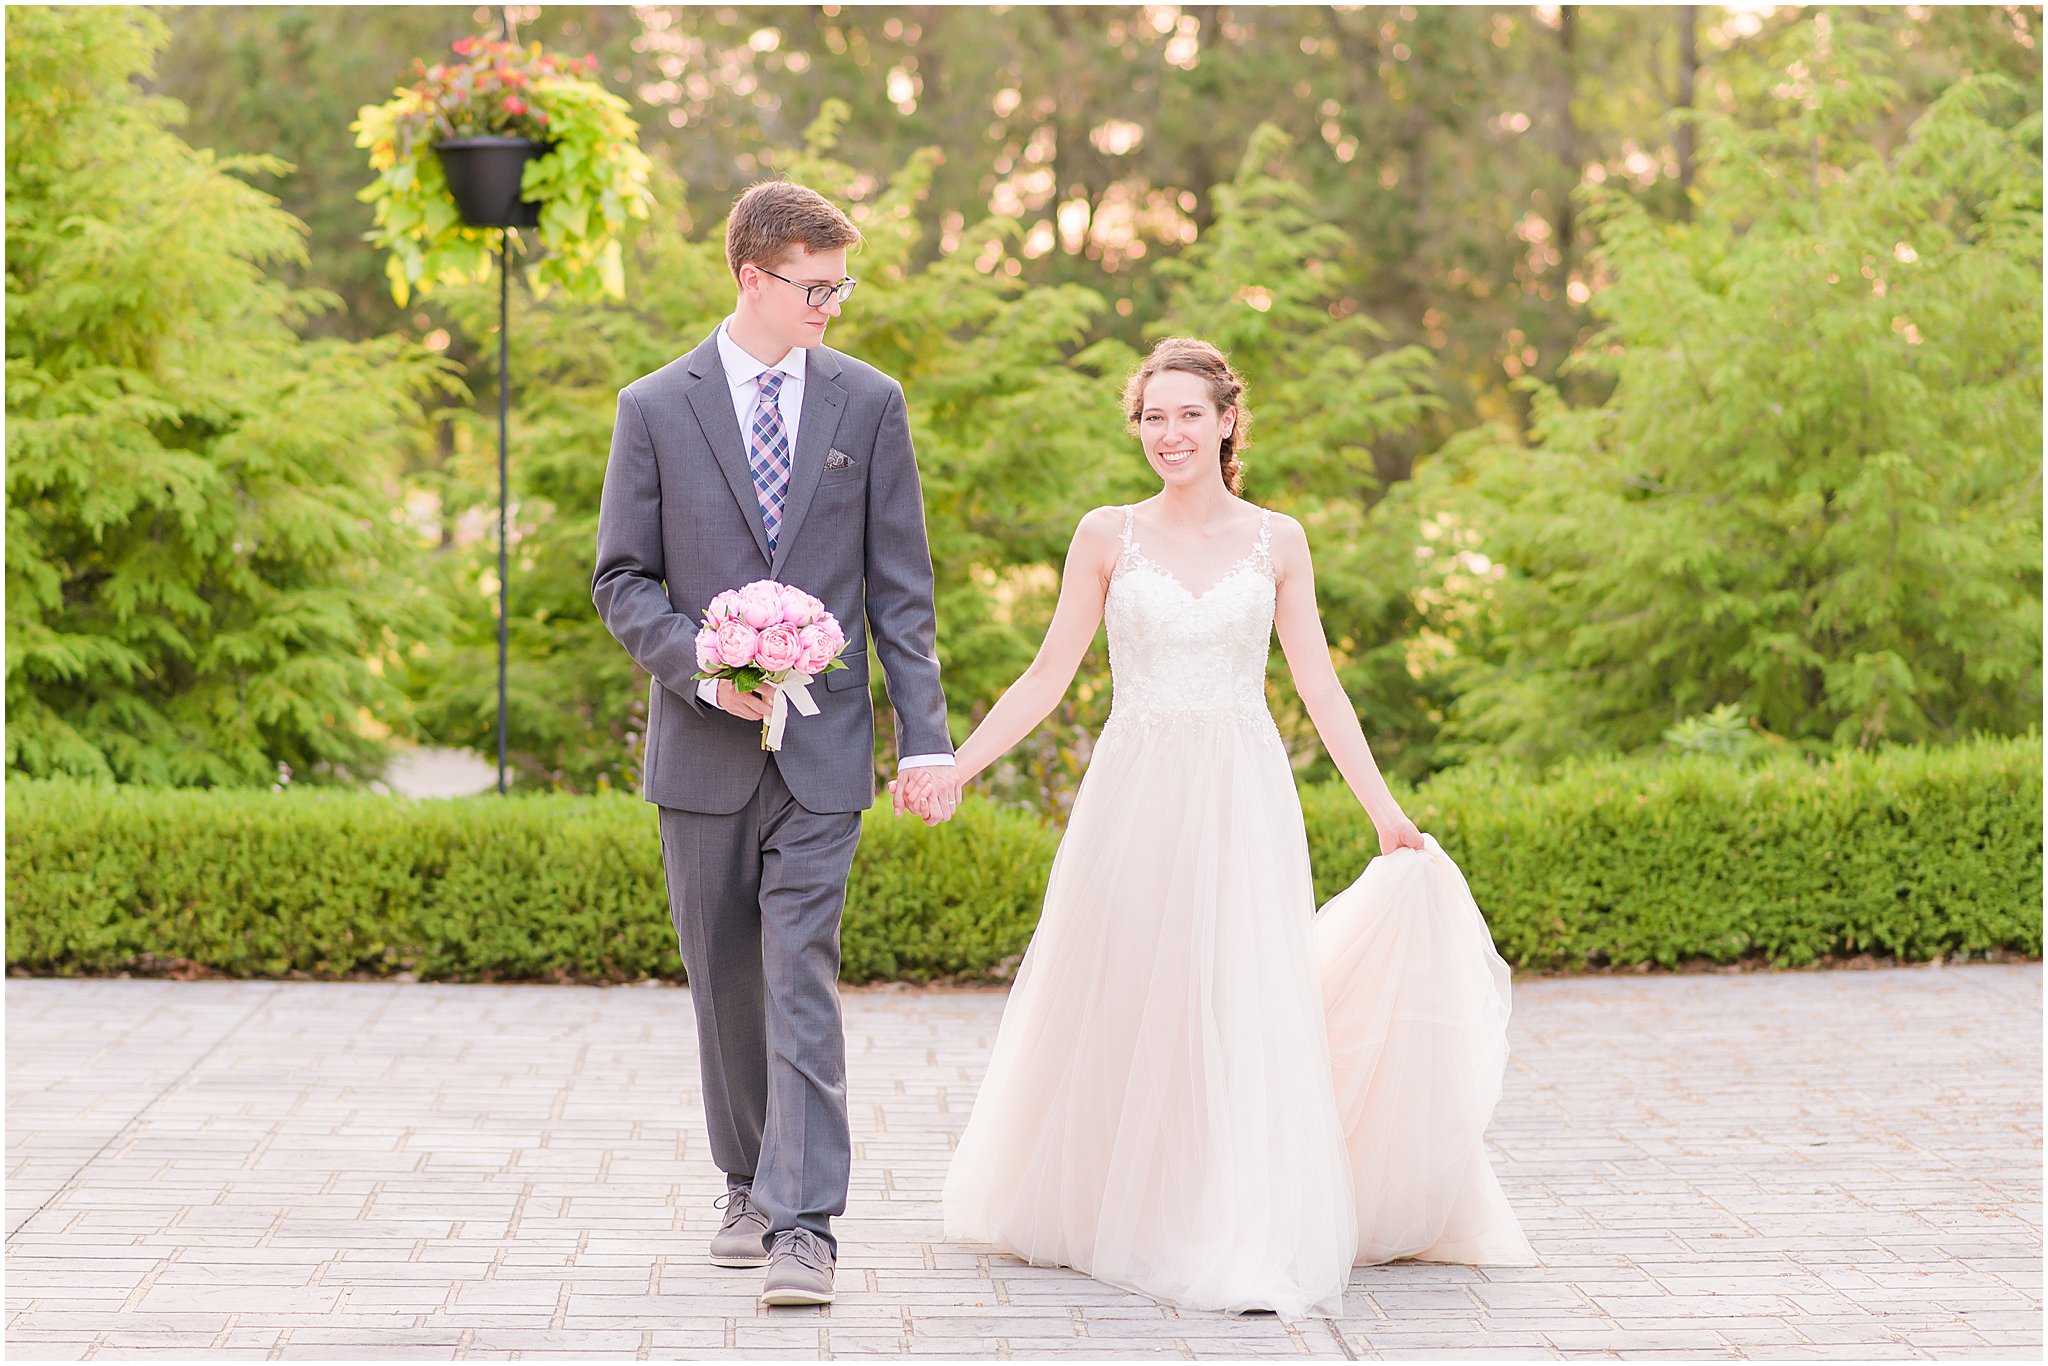 Bride and groom holding hands and walking during Coxhall Gardens wedding